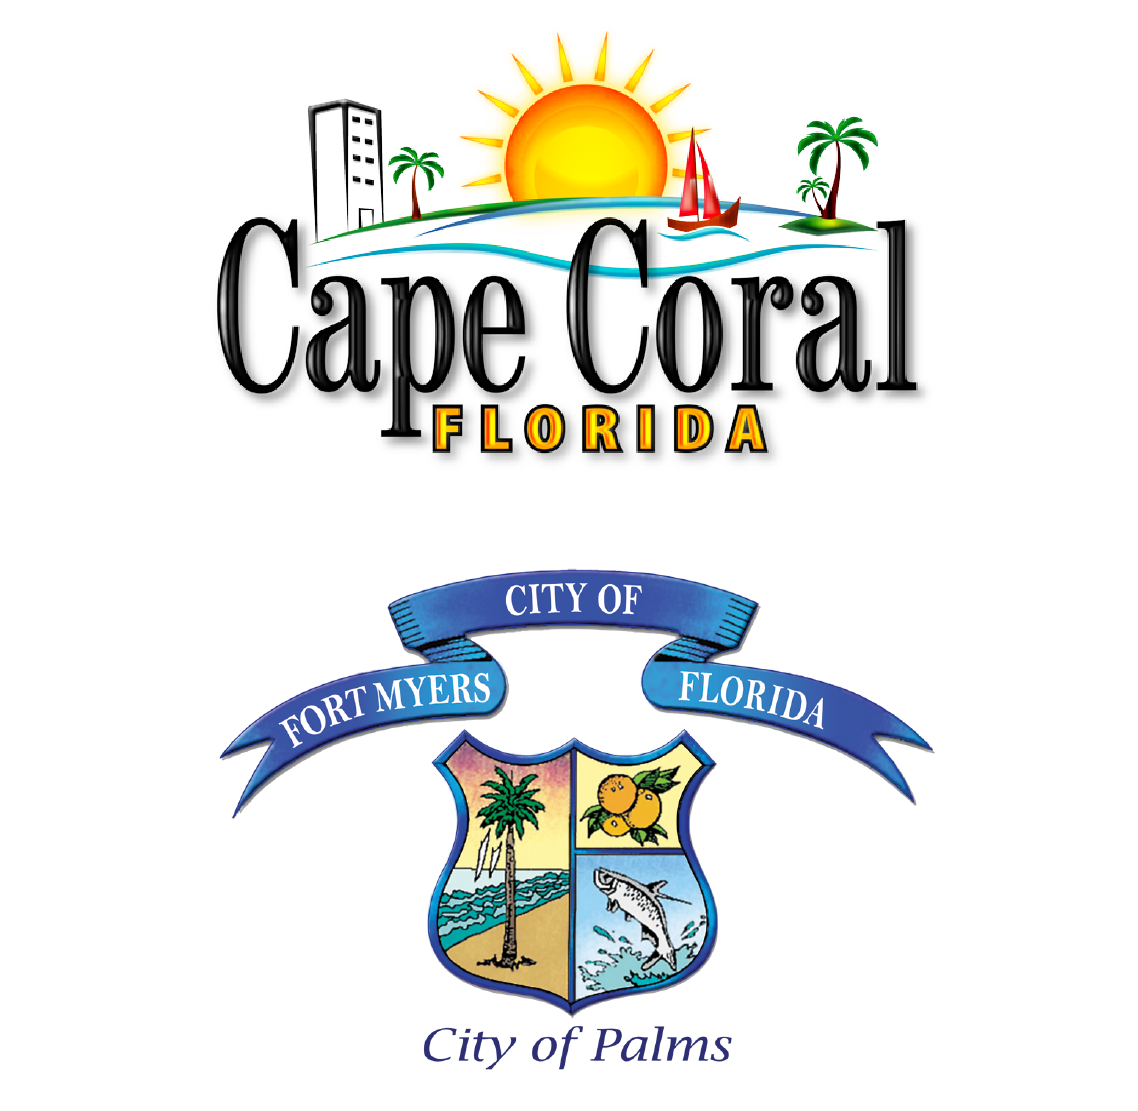 Cape Coral Florida and CIty of Fort Myers logo